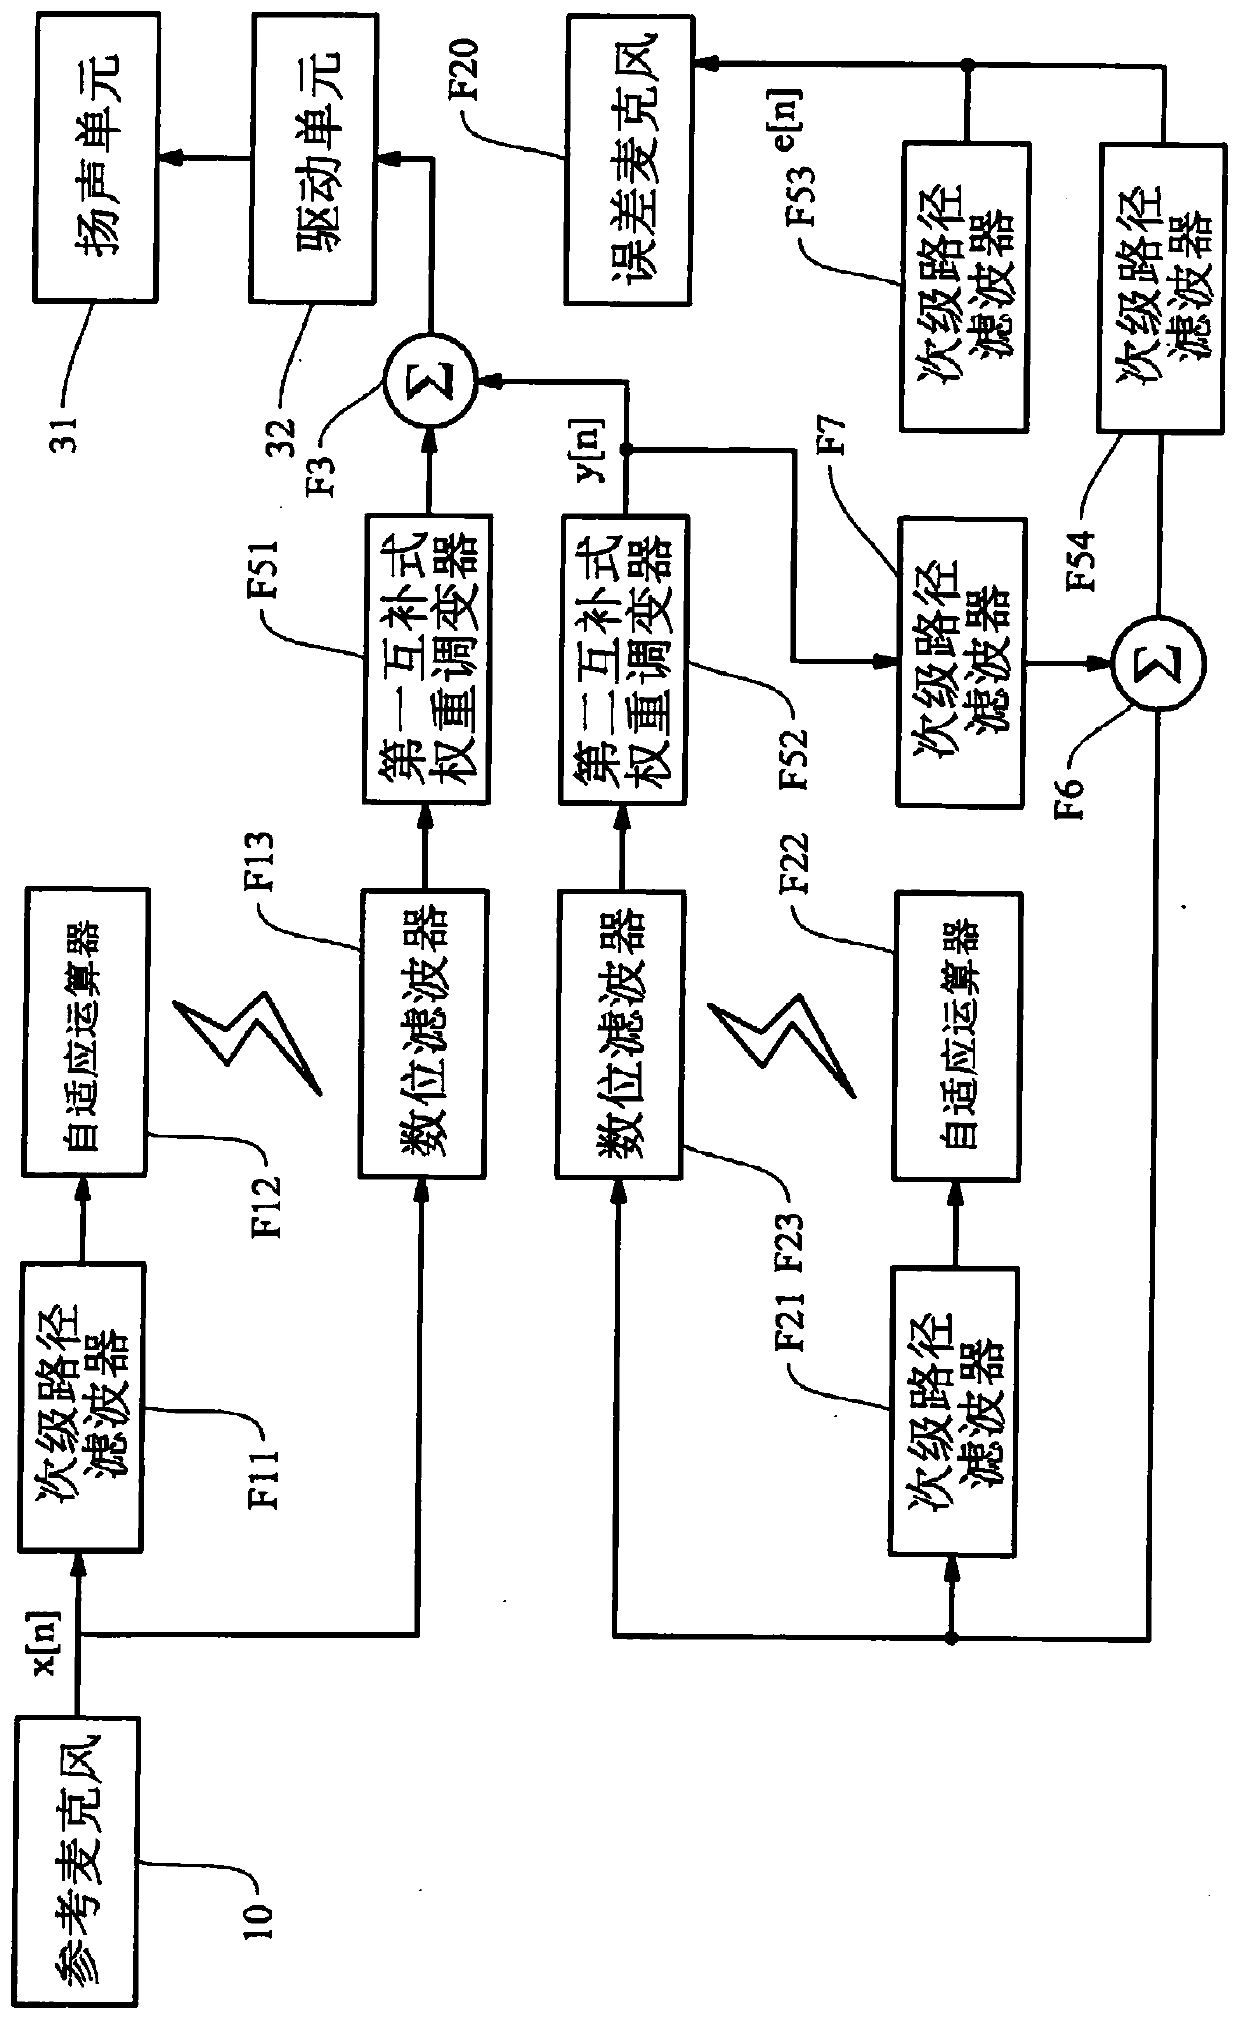 Weighting mixed form active anti-noise system and controller